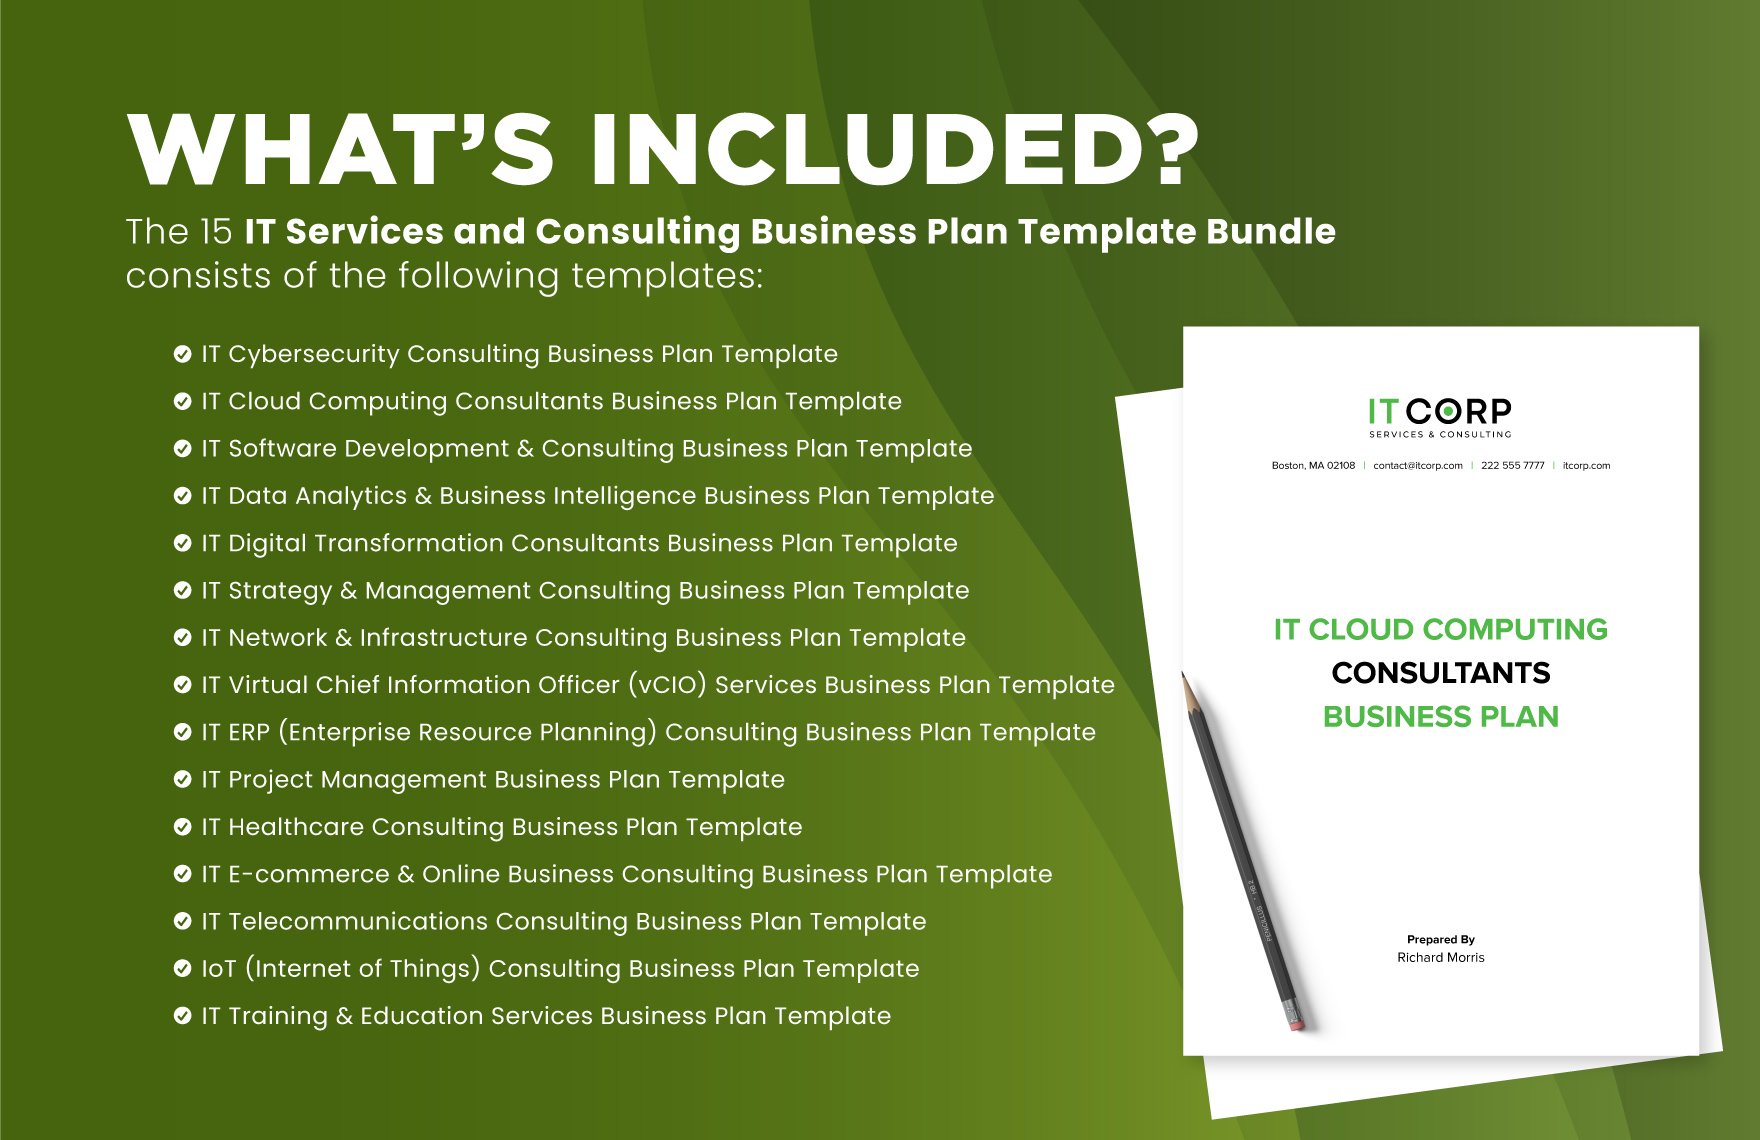 15 IT Services and Consulting Business Plan Template Bundle